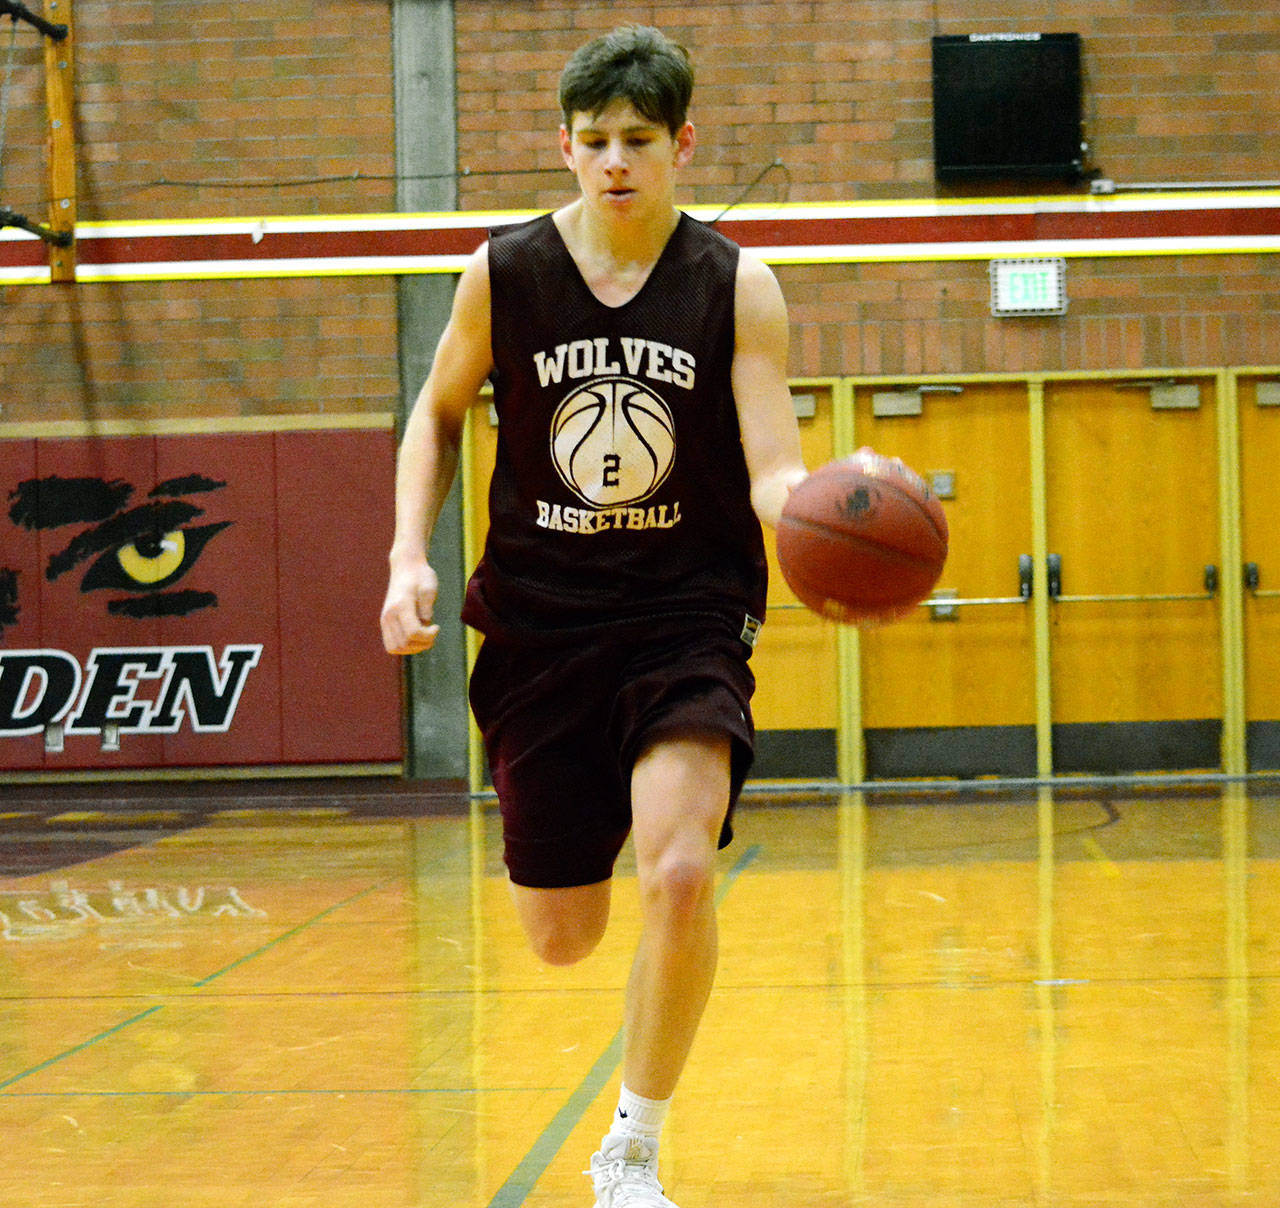 South Kitsap sophomore Gavin Morkert takes part in a conditioning drill. (Photo by Mark Krulish | Kitsap Daily News)